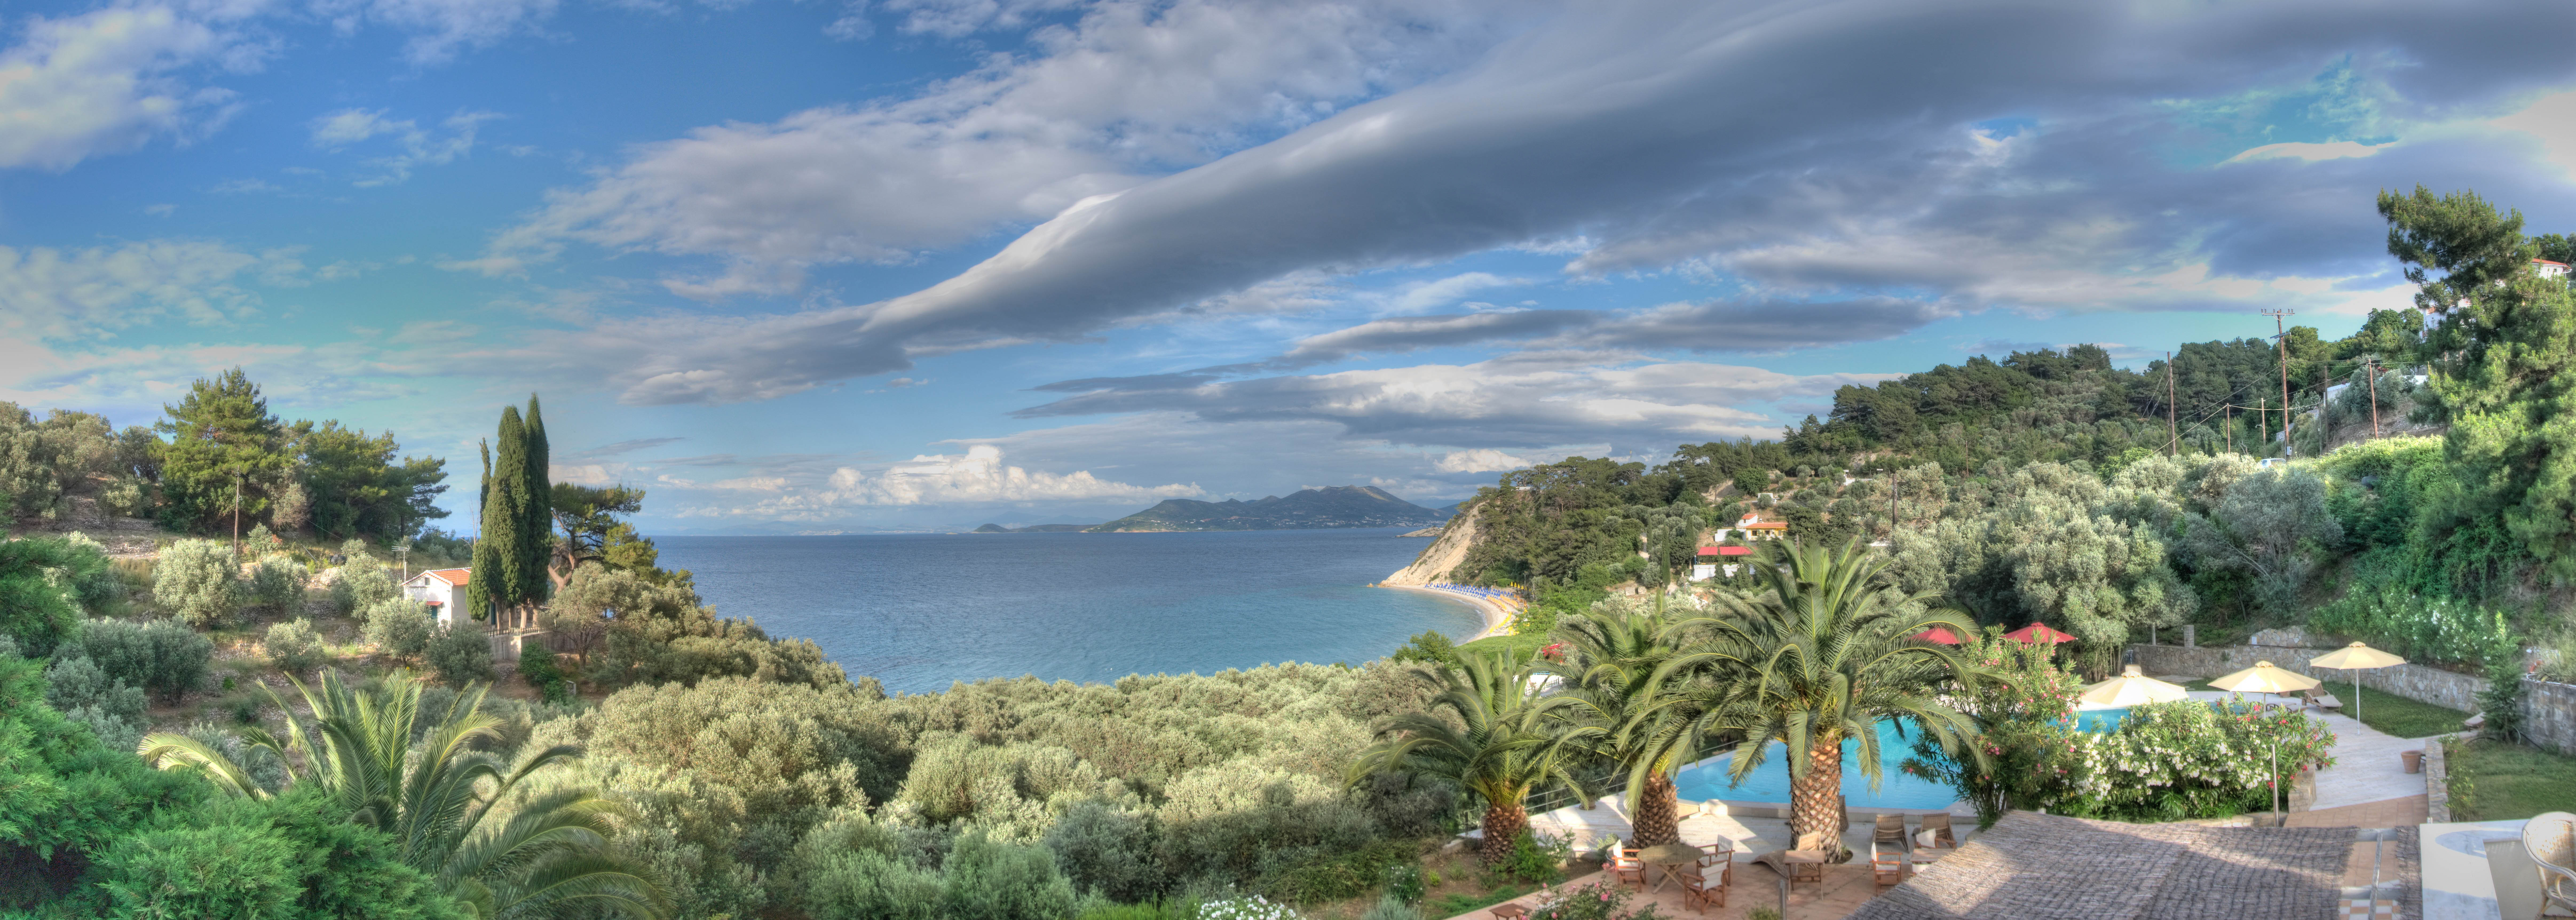 Samos Panorama in HDR